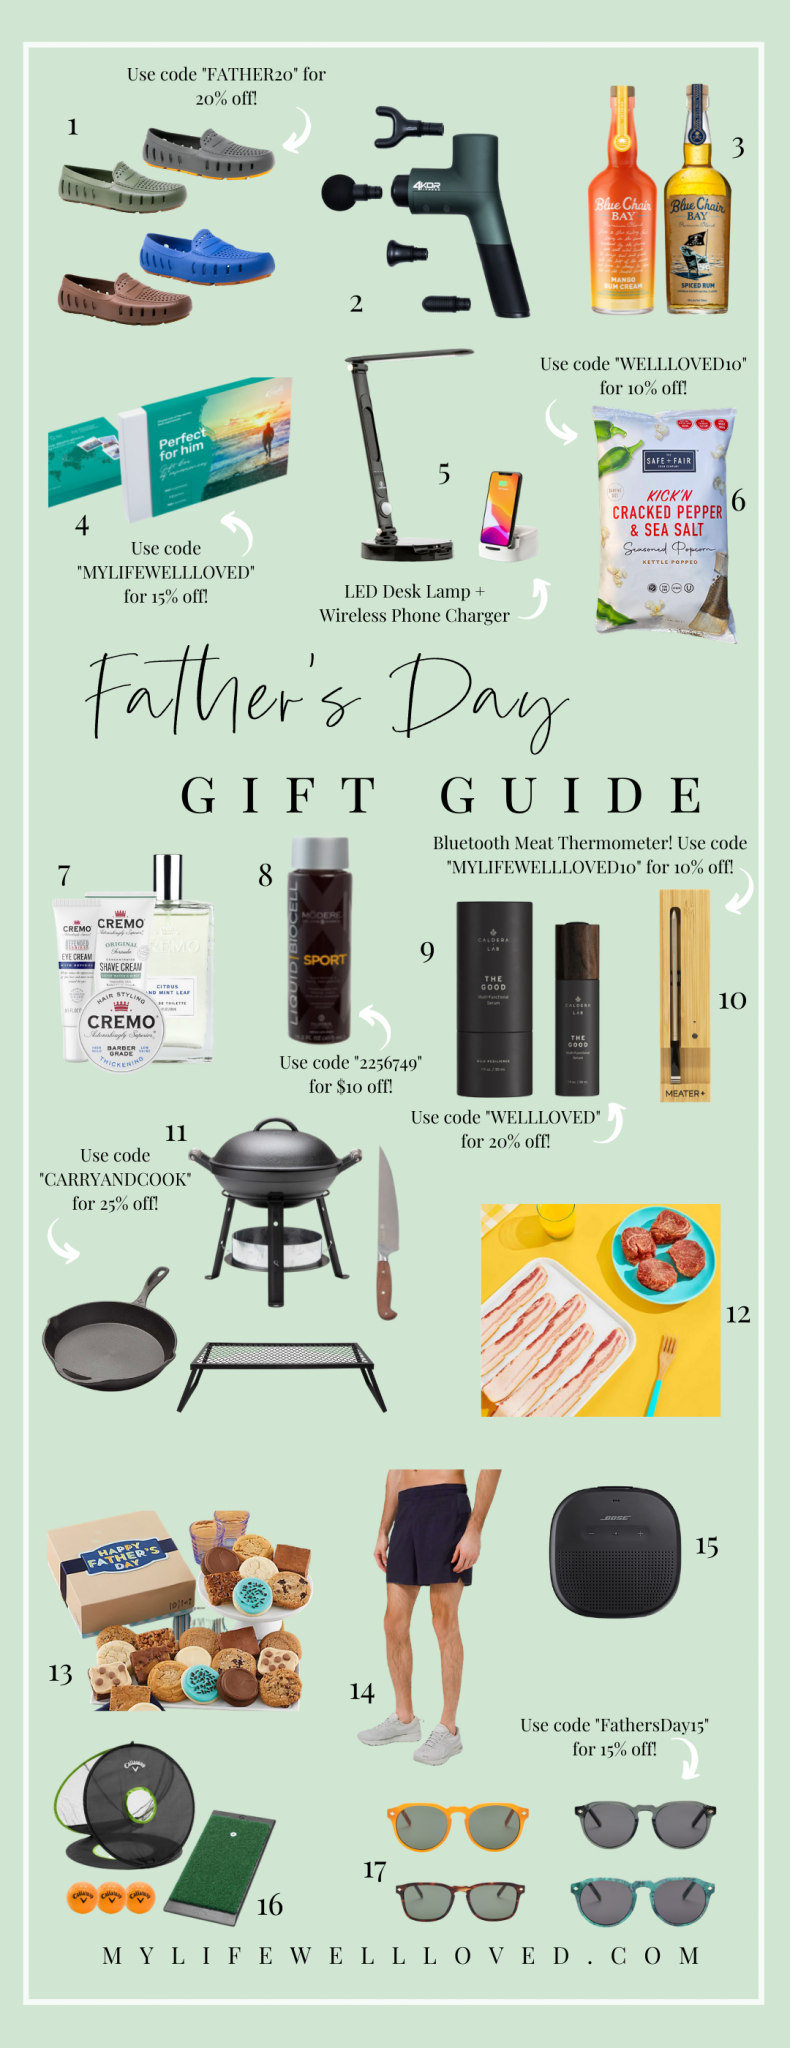 16+ Unique Father's Day Gifts He'll Love - Healthy By Heather Brown